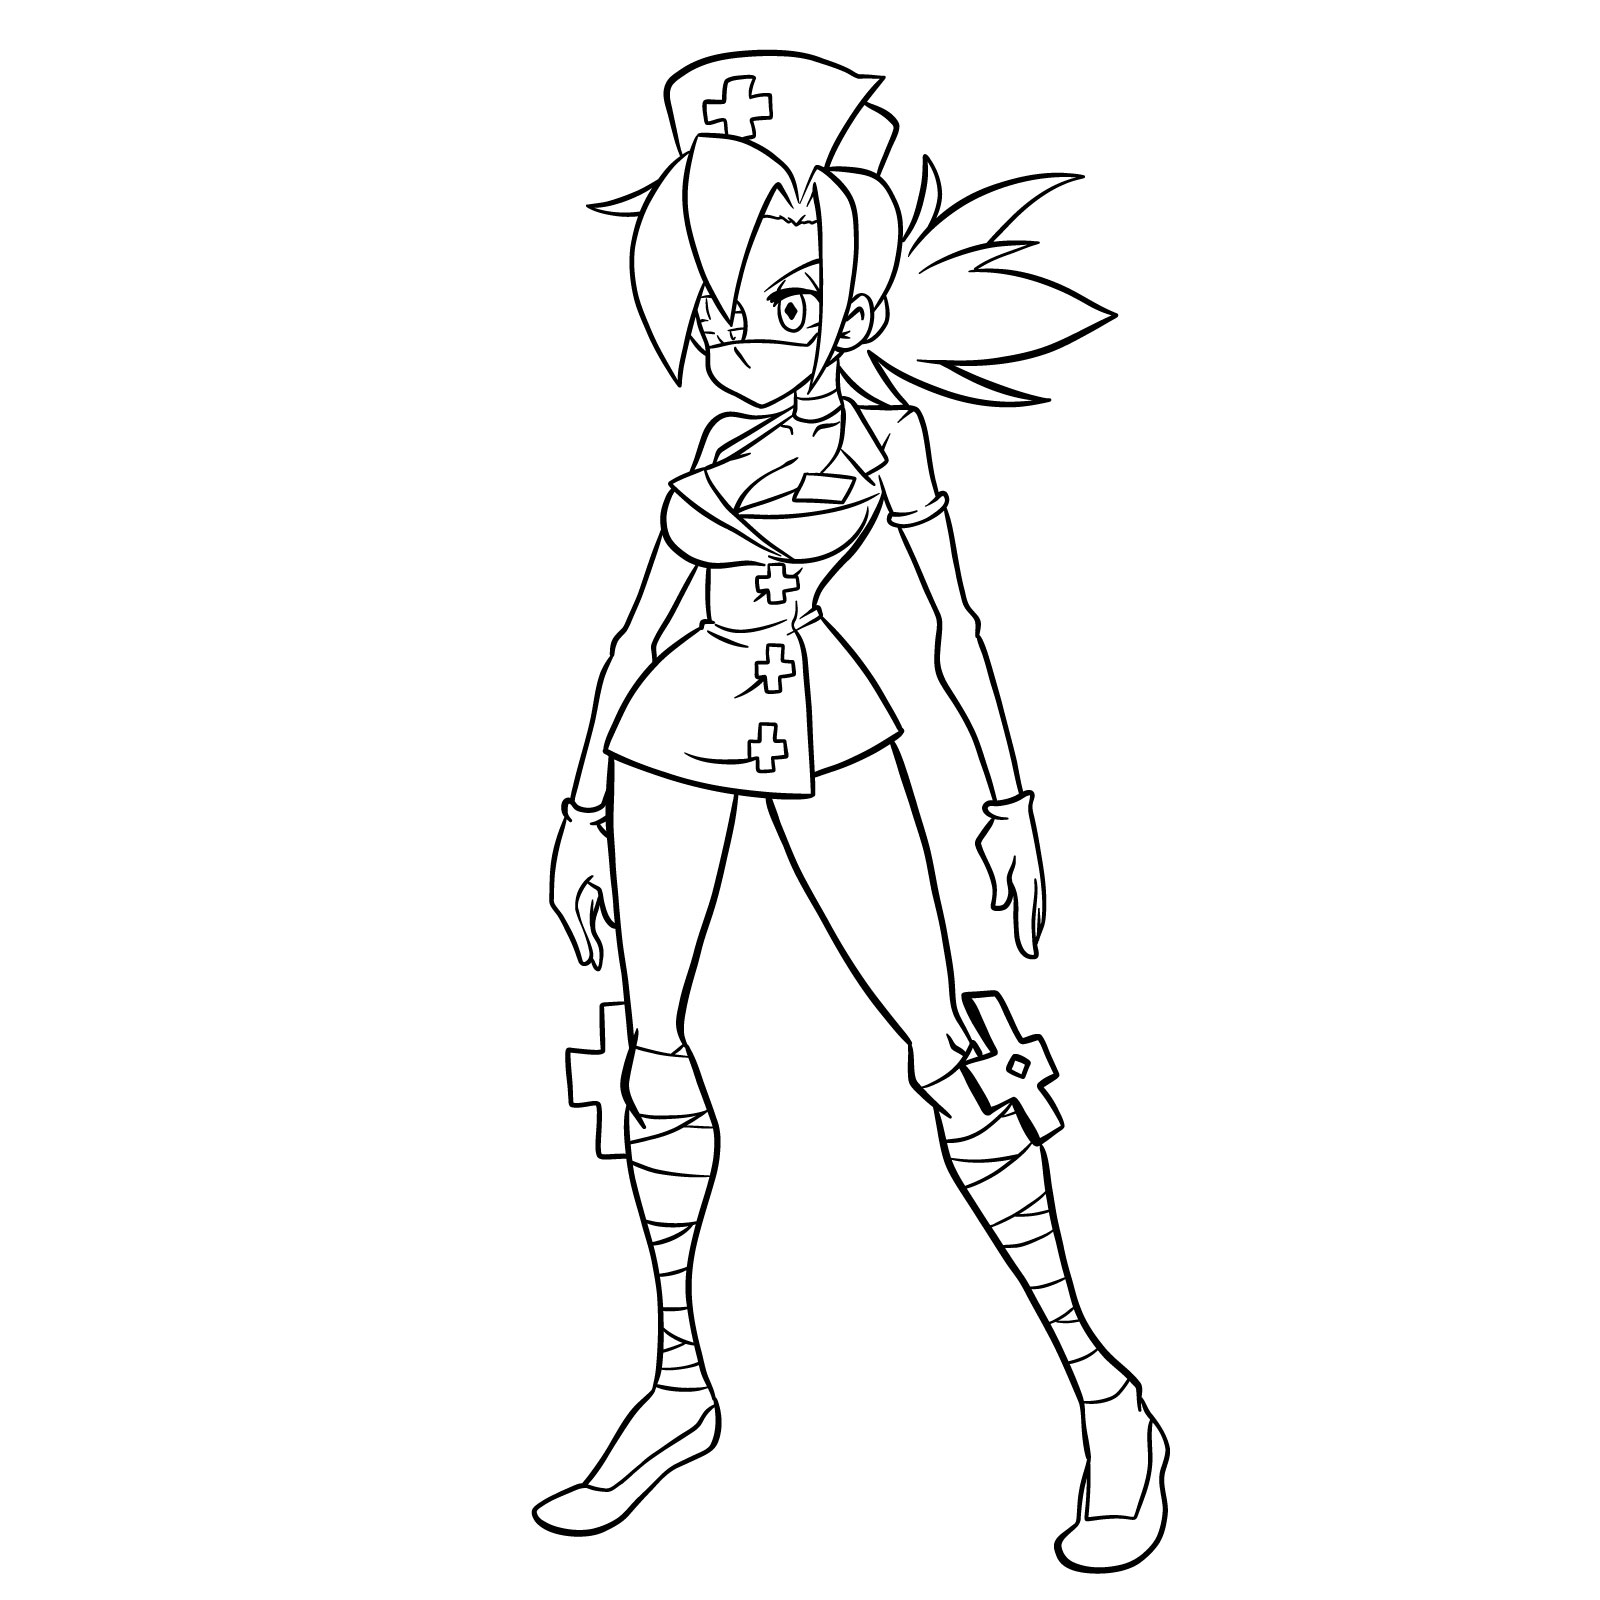 How to draw Valentine from Skullgirls - final step